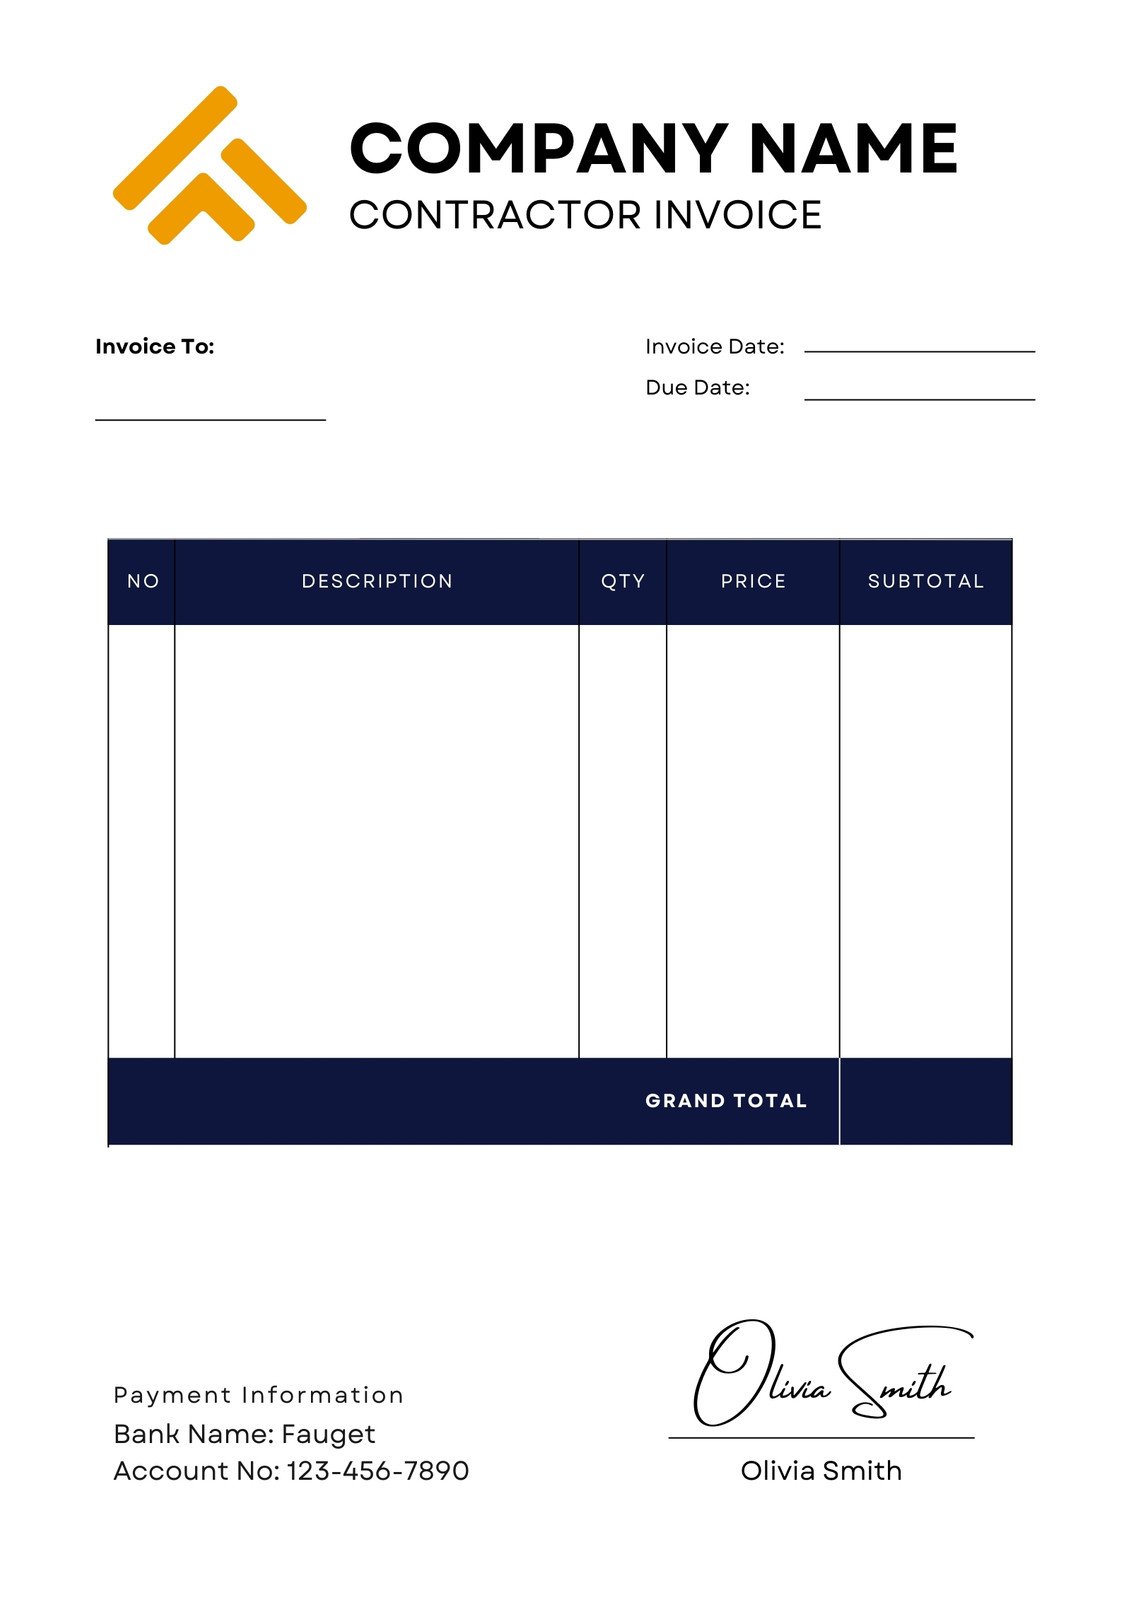 Modern Contractor Invoice (Printable)